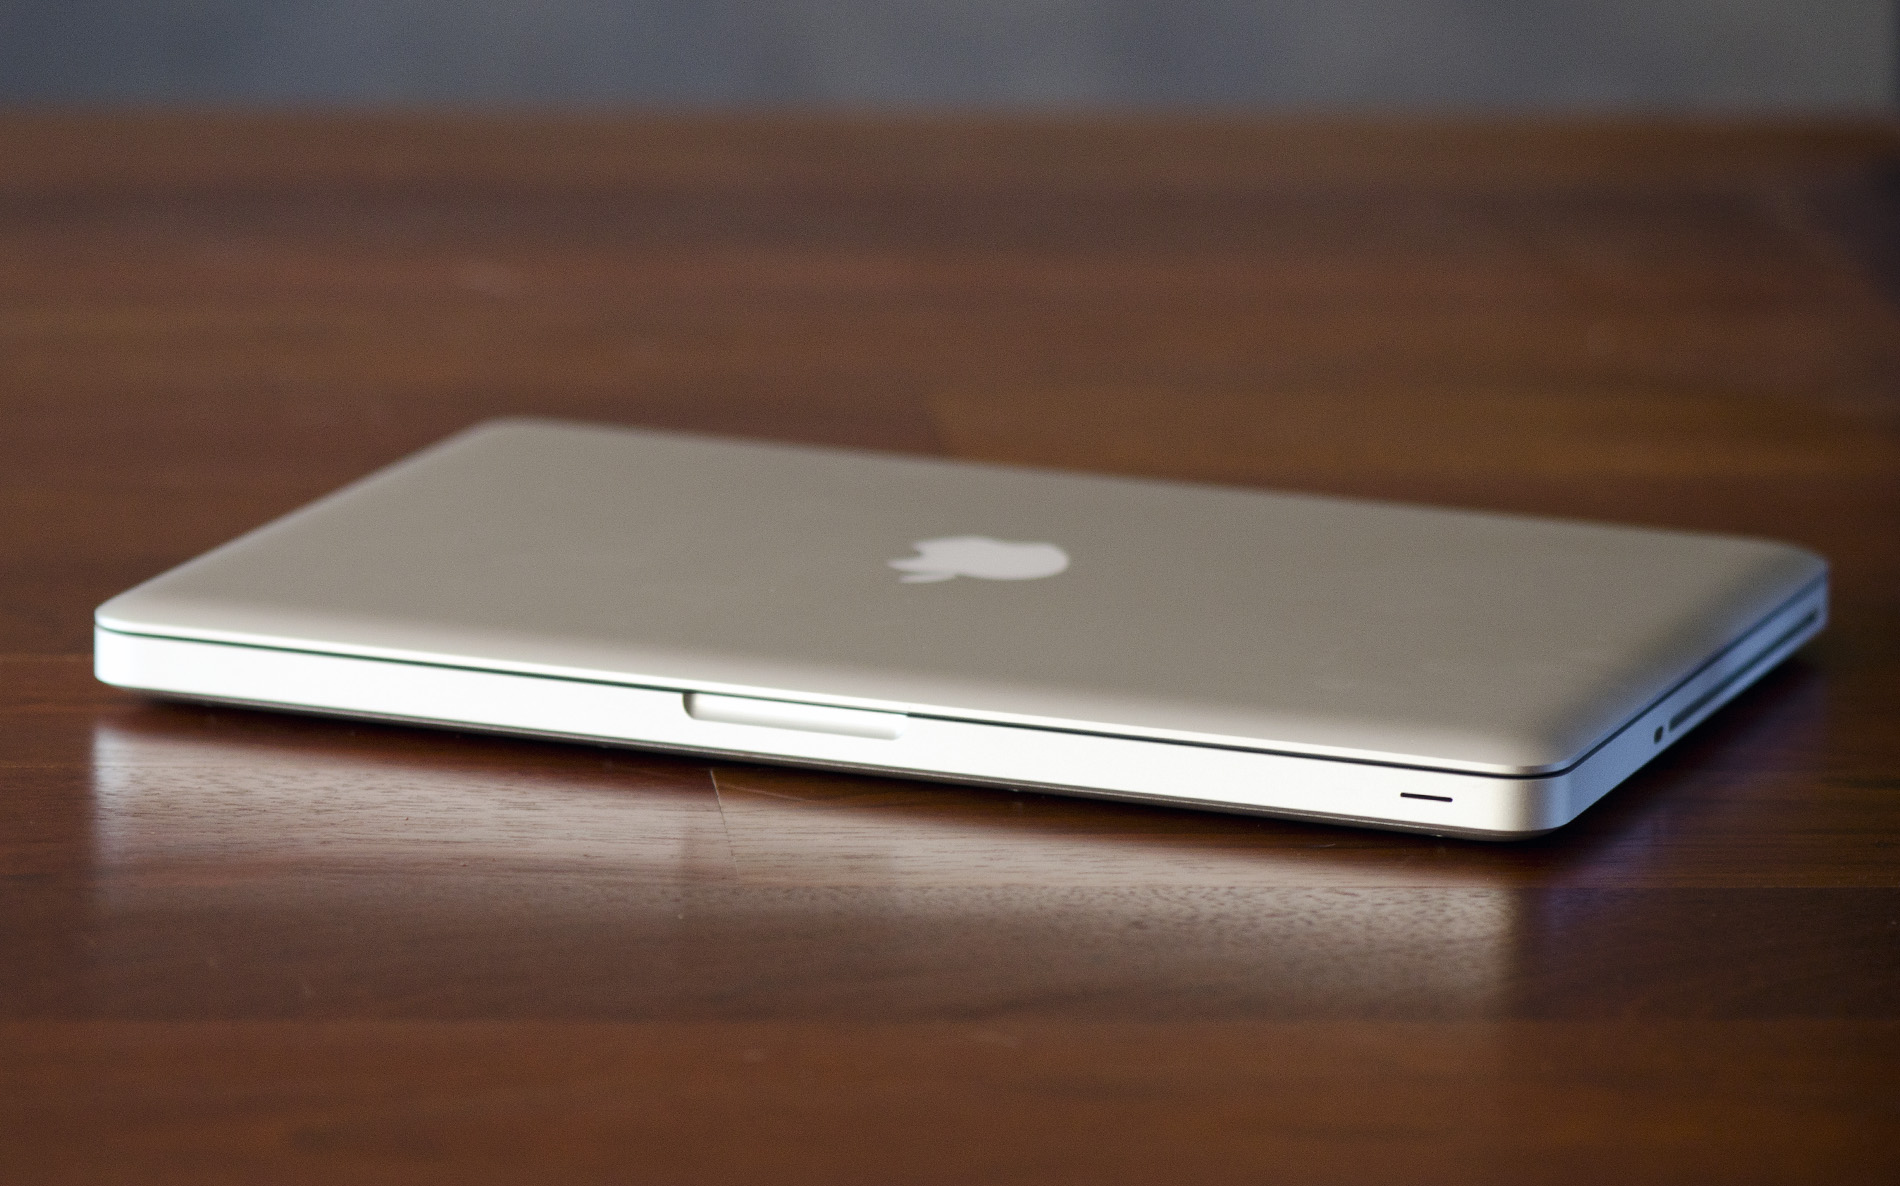 Battery Life - The MacBook Pro Review (13 & 15-inch): 2011 Brings ...